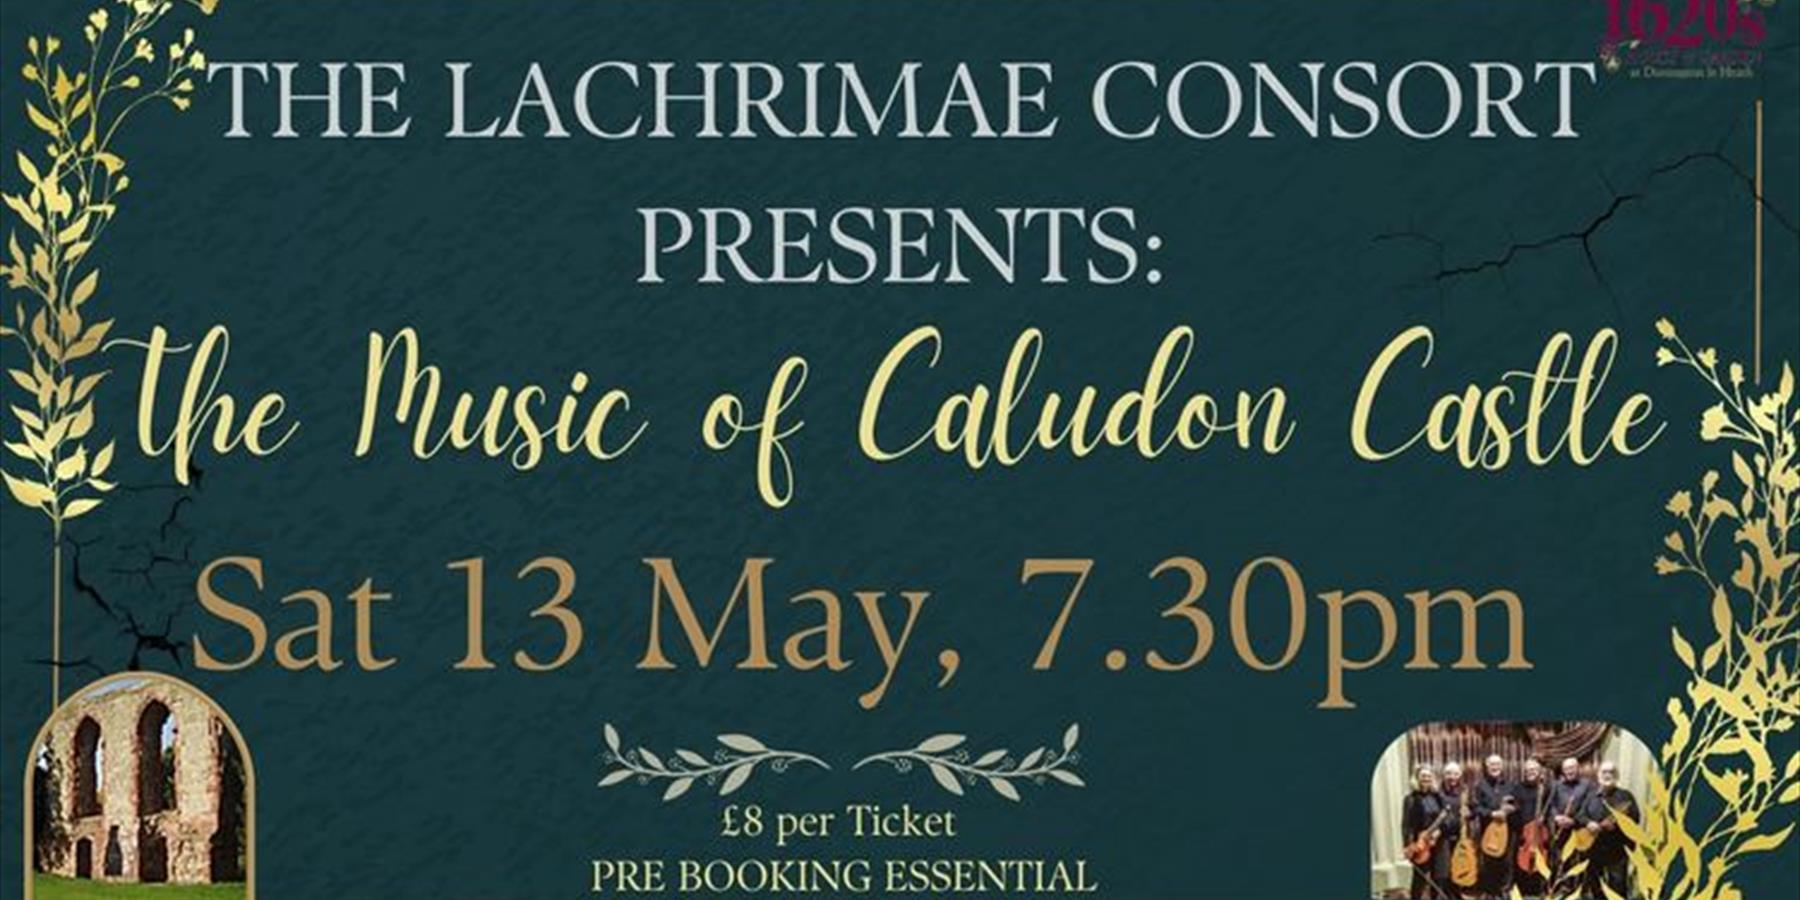 Lachrimae Consort Presents: The Music of Caludon Castle